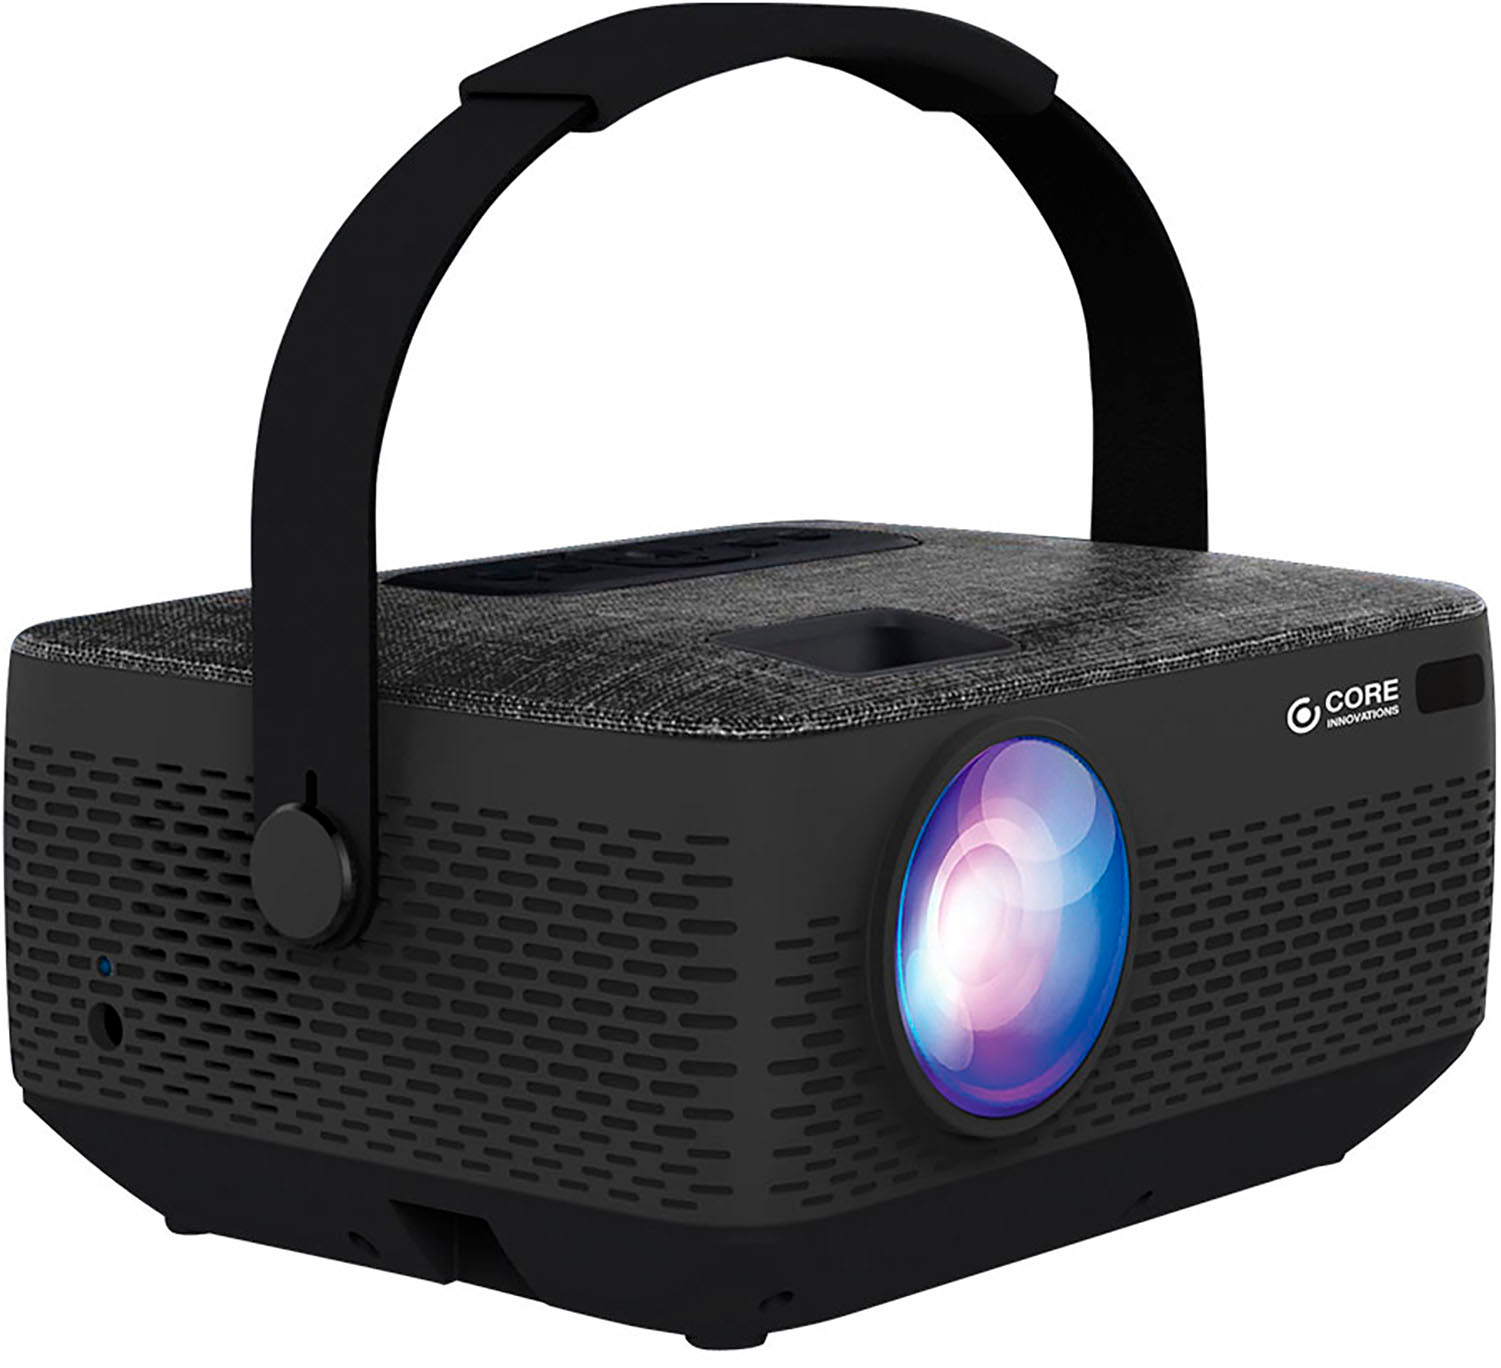 Angle View: Core Innovations - 720p – HD 150” Portable LCD Home Theater Projector with Built-in Battery - Black